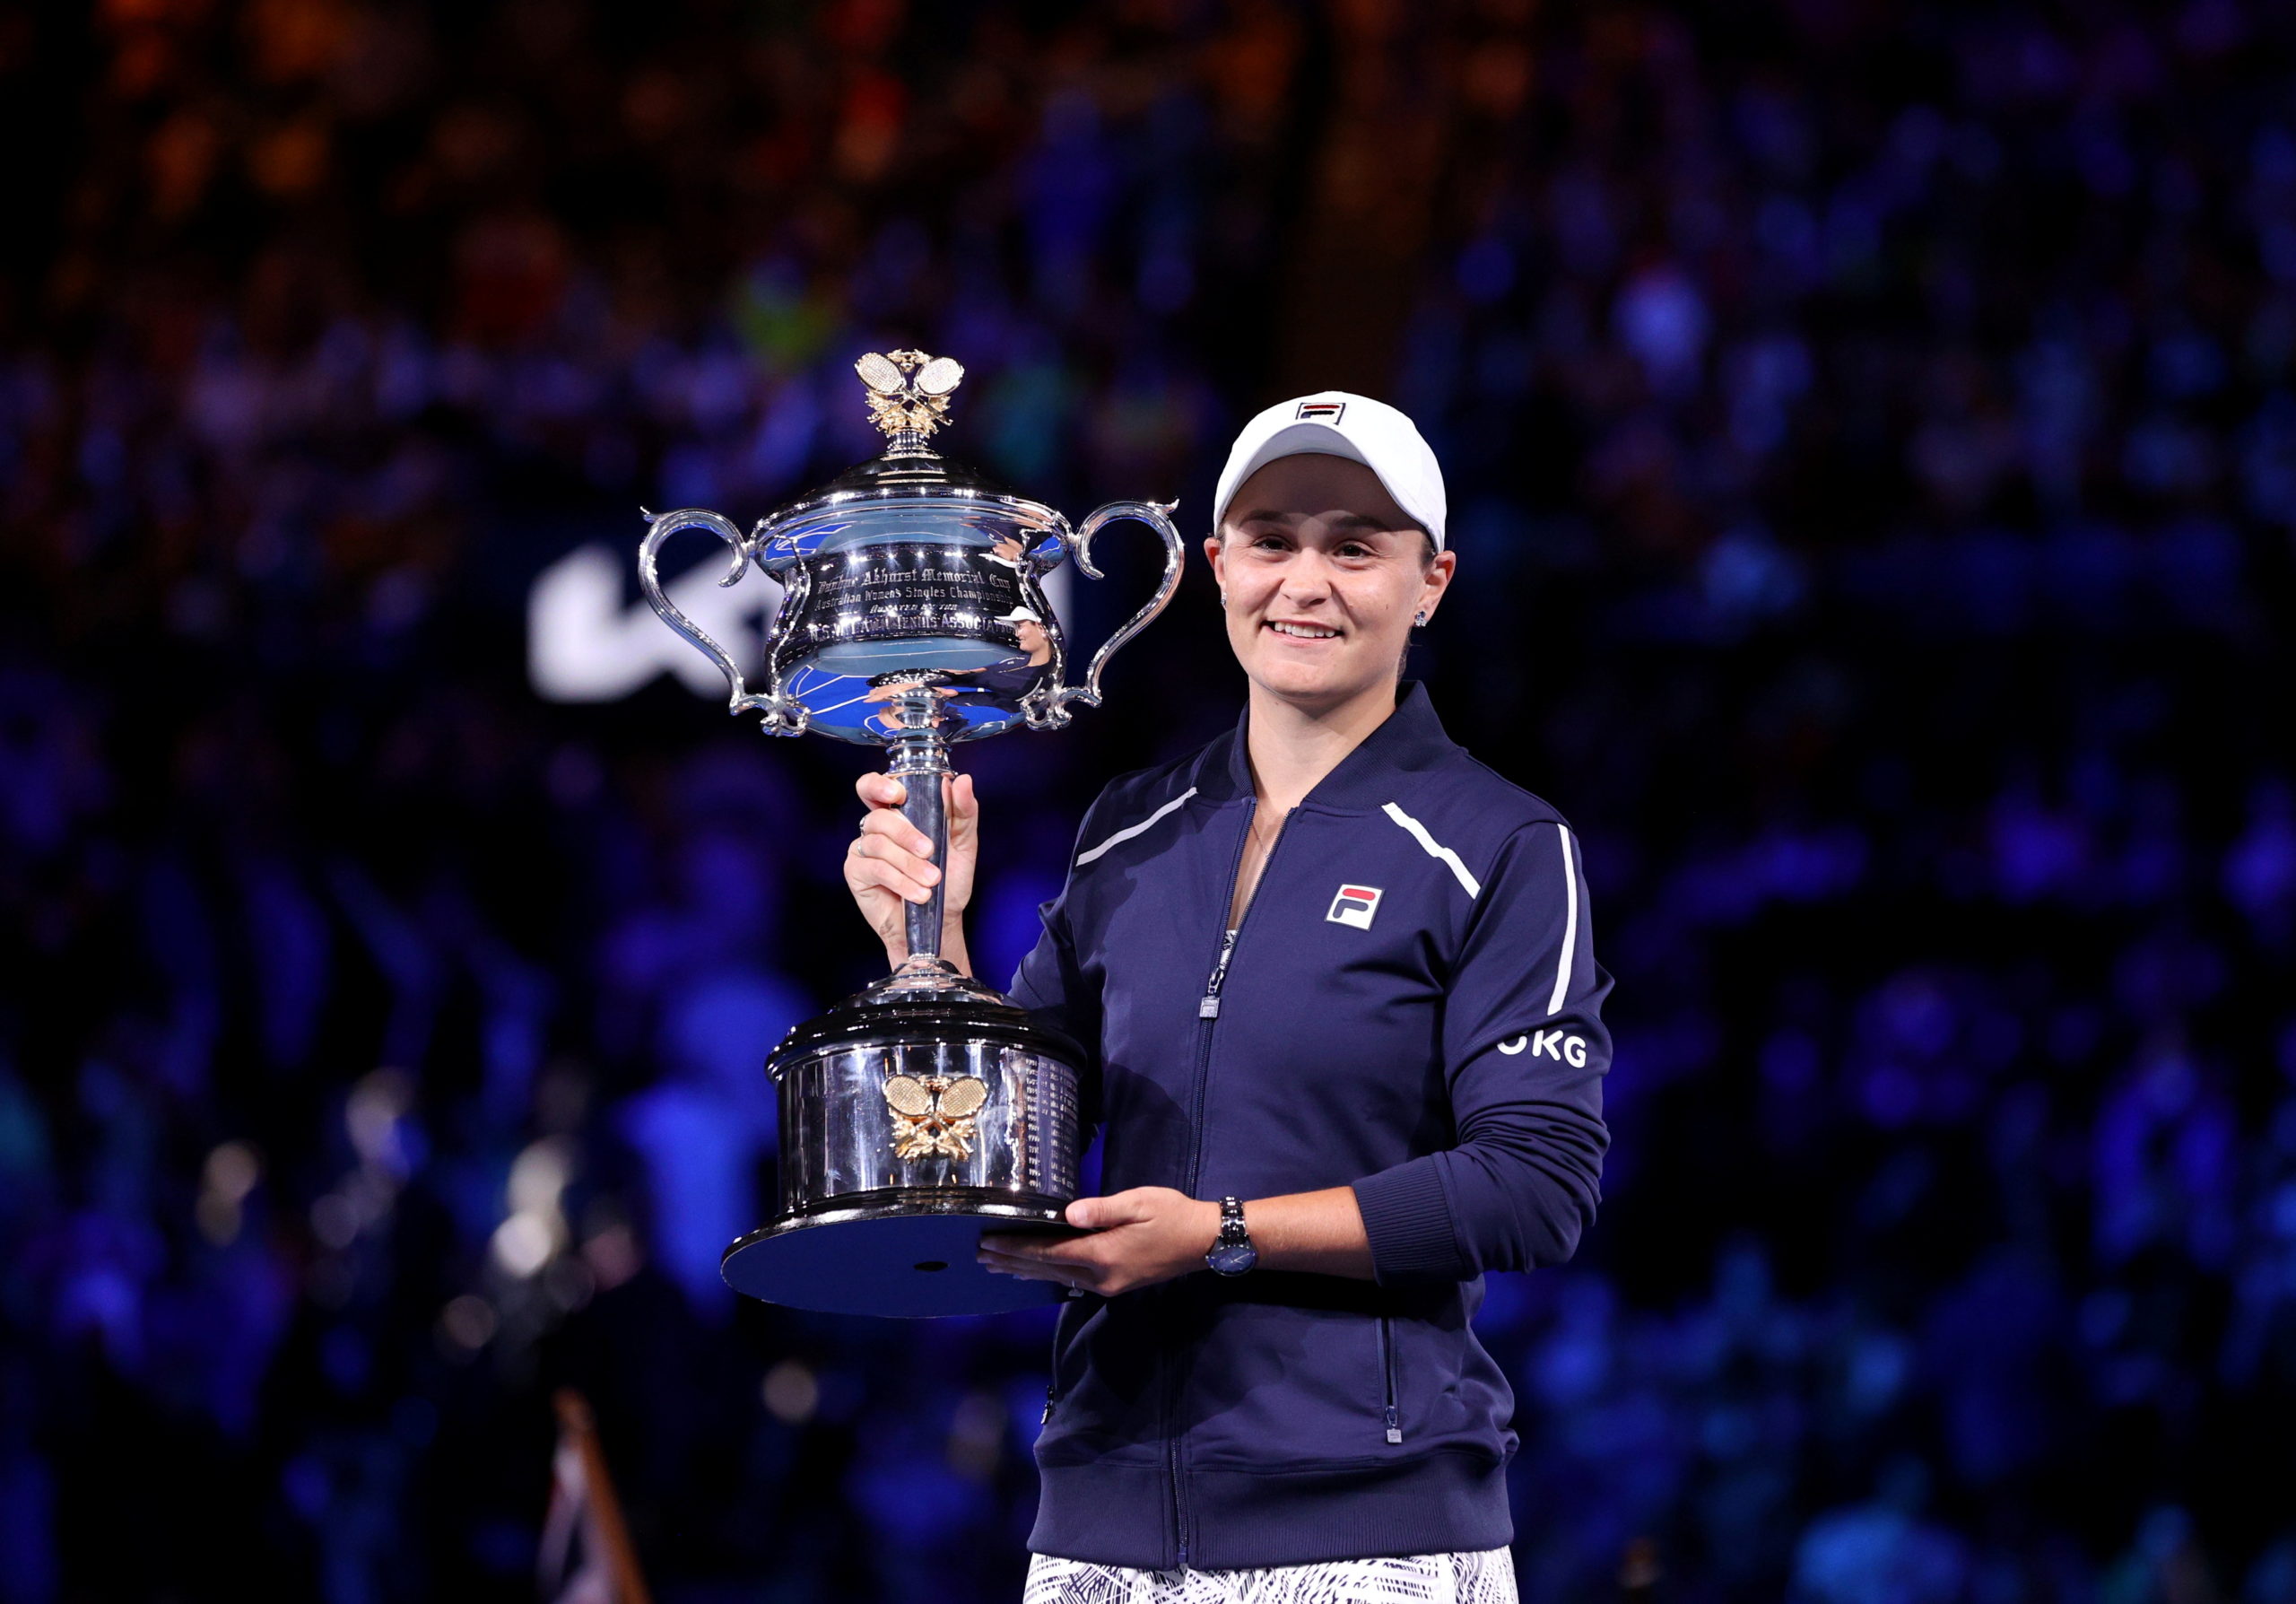 FILE PHOTO: Tennis - Australian Open - Women's Singles Final - Melbourne Park, Melbourne, Australia - January 29, 2022 Australia's Ashleigh Barty poses as she celebrates winning the final against Danielle Collins of the U.S. with the trophy 